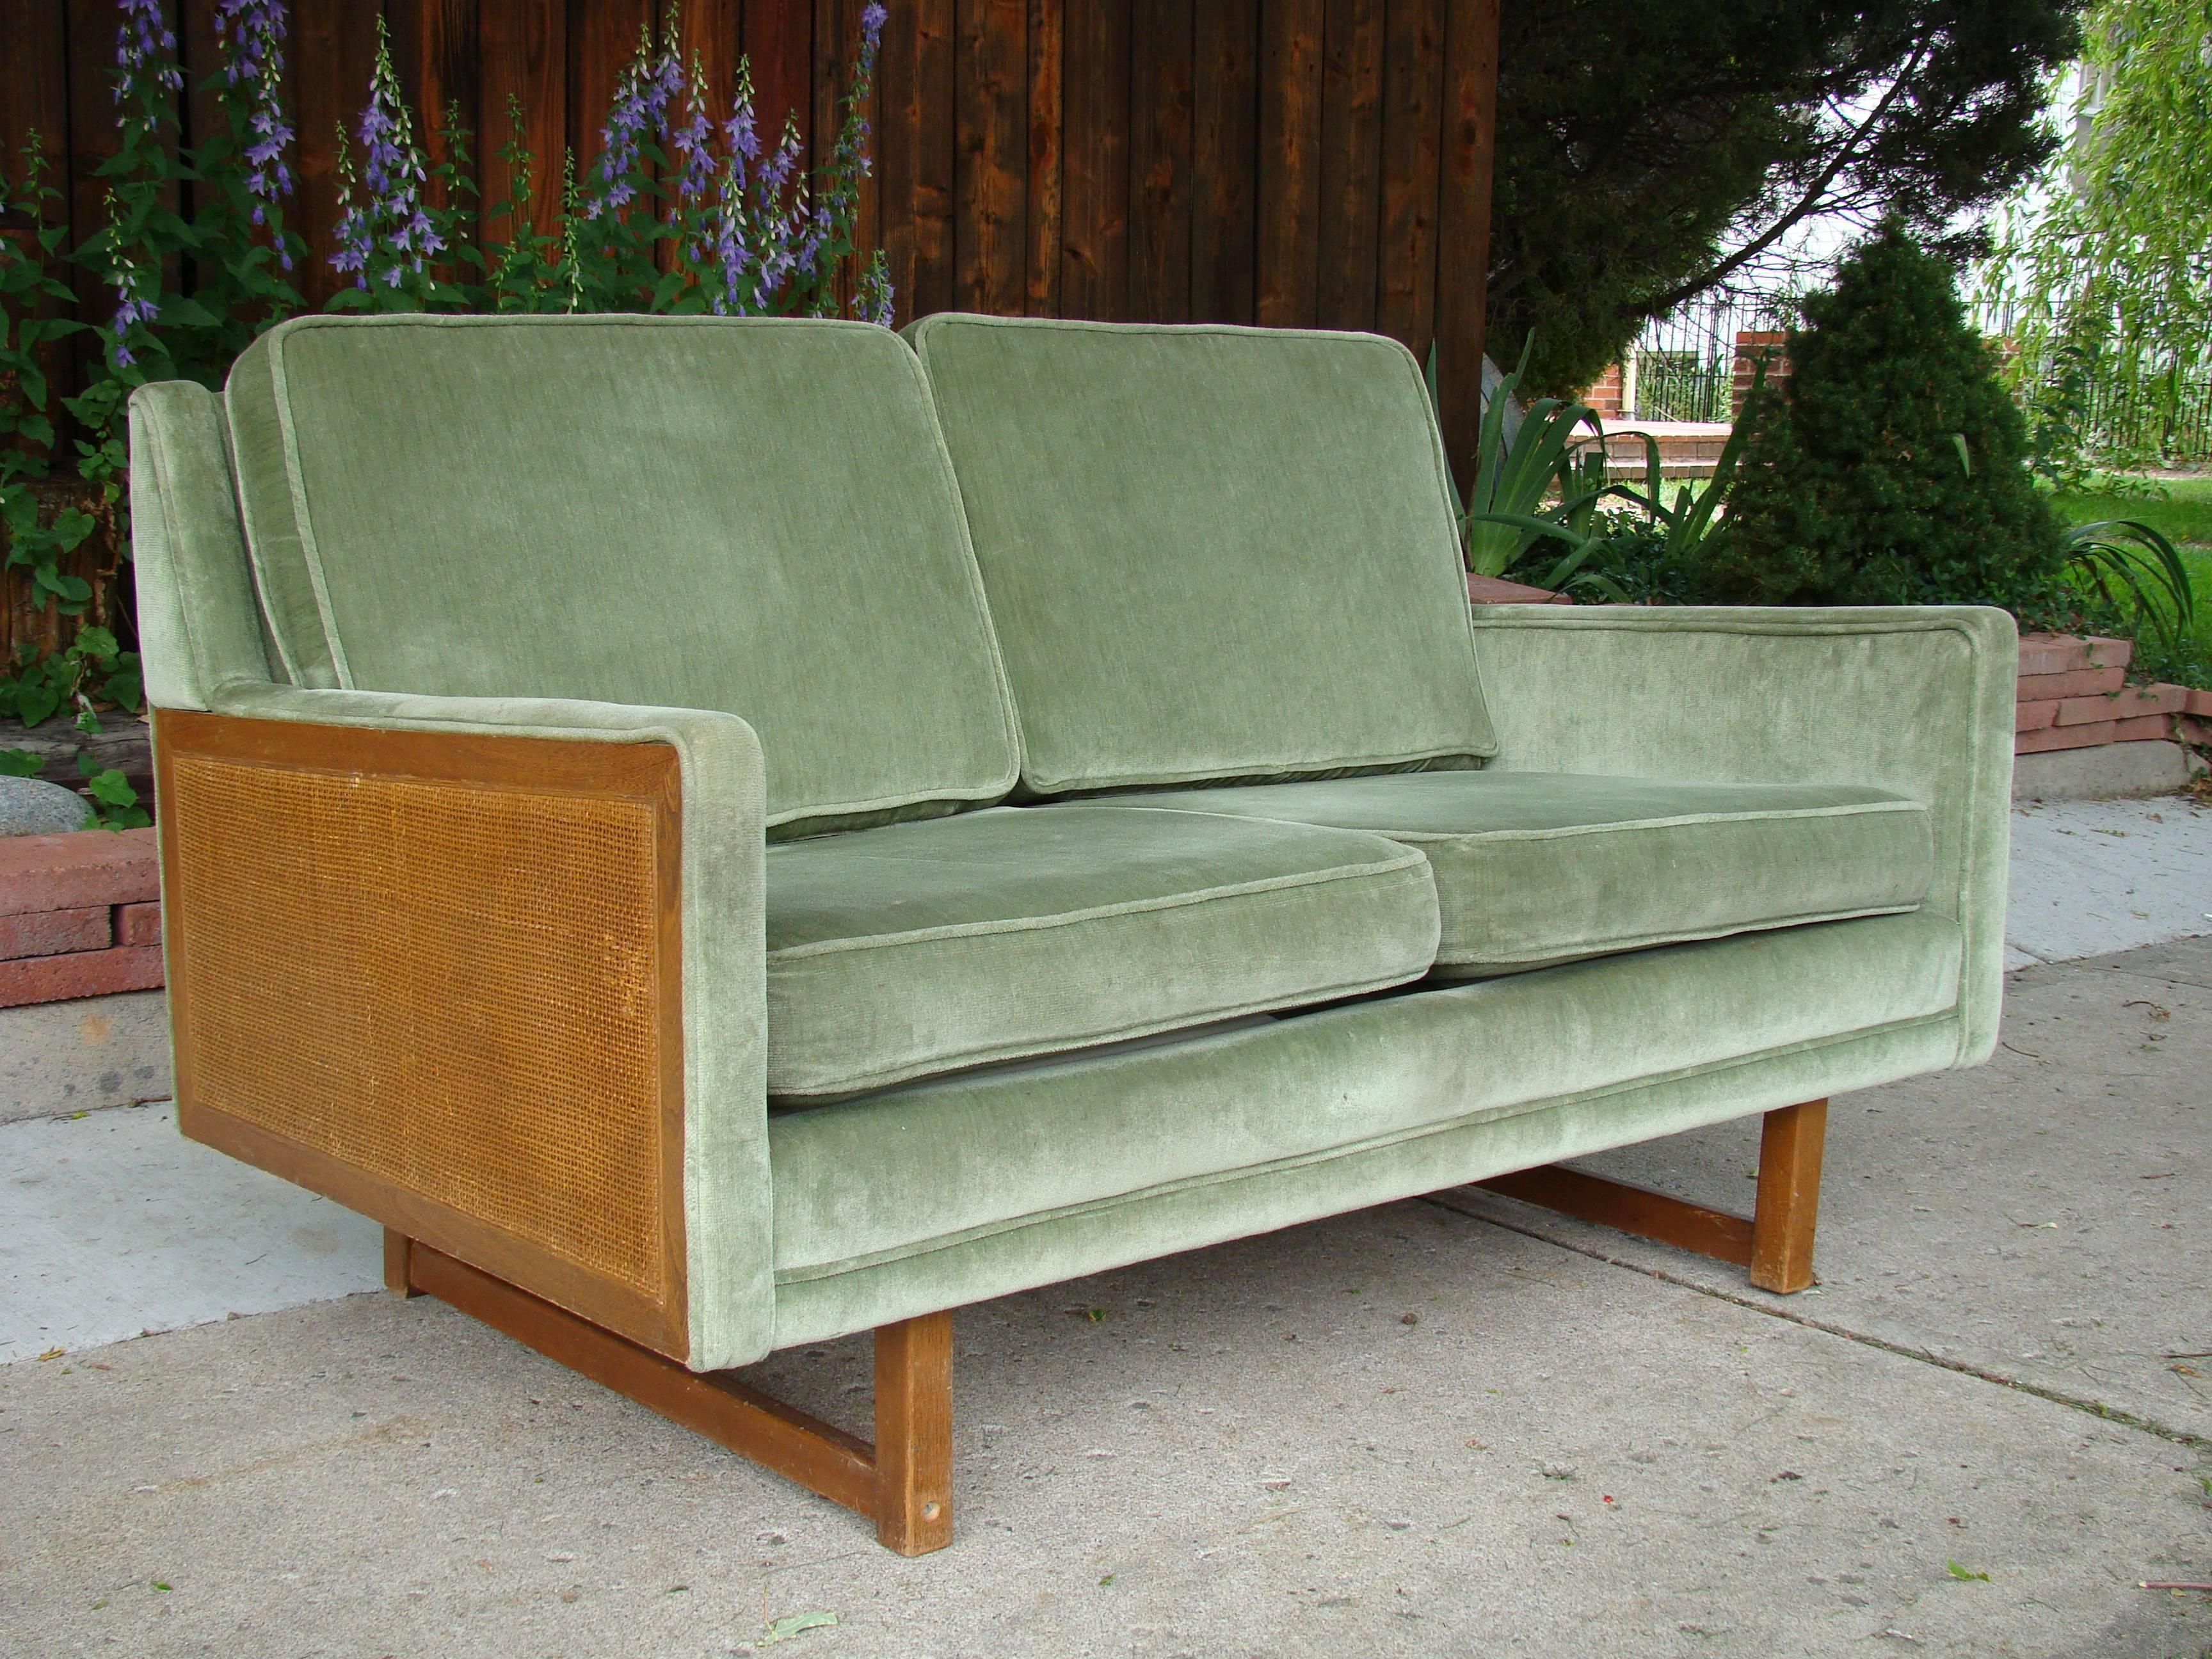 Beautiful celery green loveseat in the style of Peter Hvidt. Perfect for those smaller spaces.